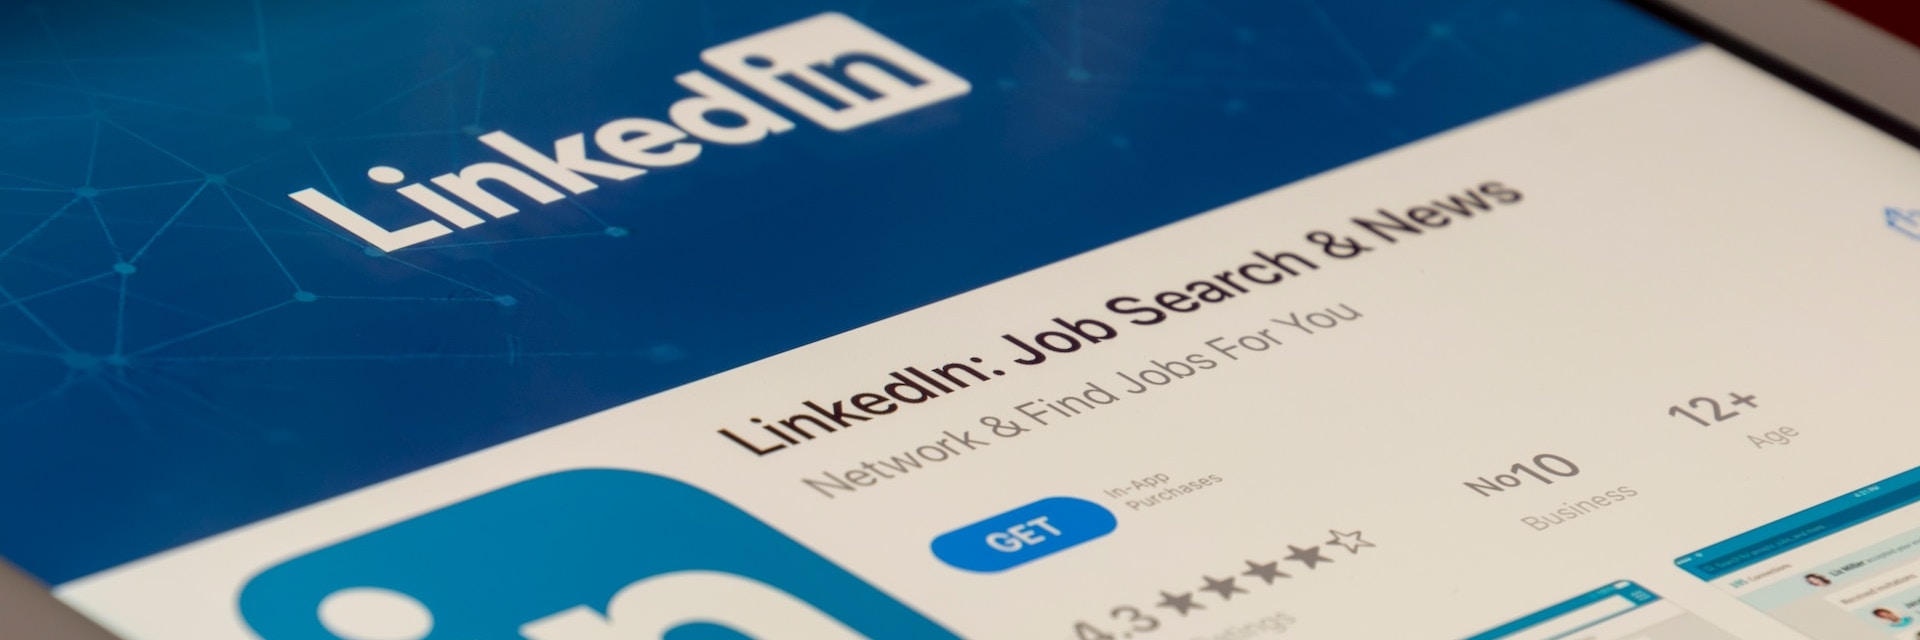 Here's how 13 news outlets are using LinkedIn newsletters